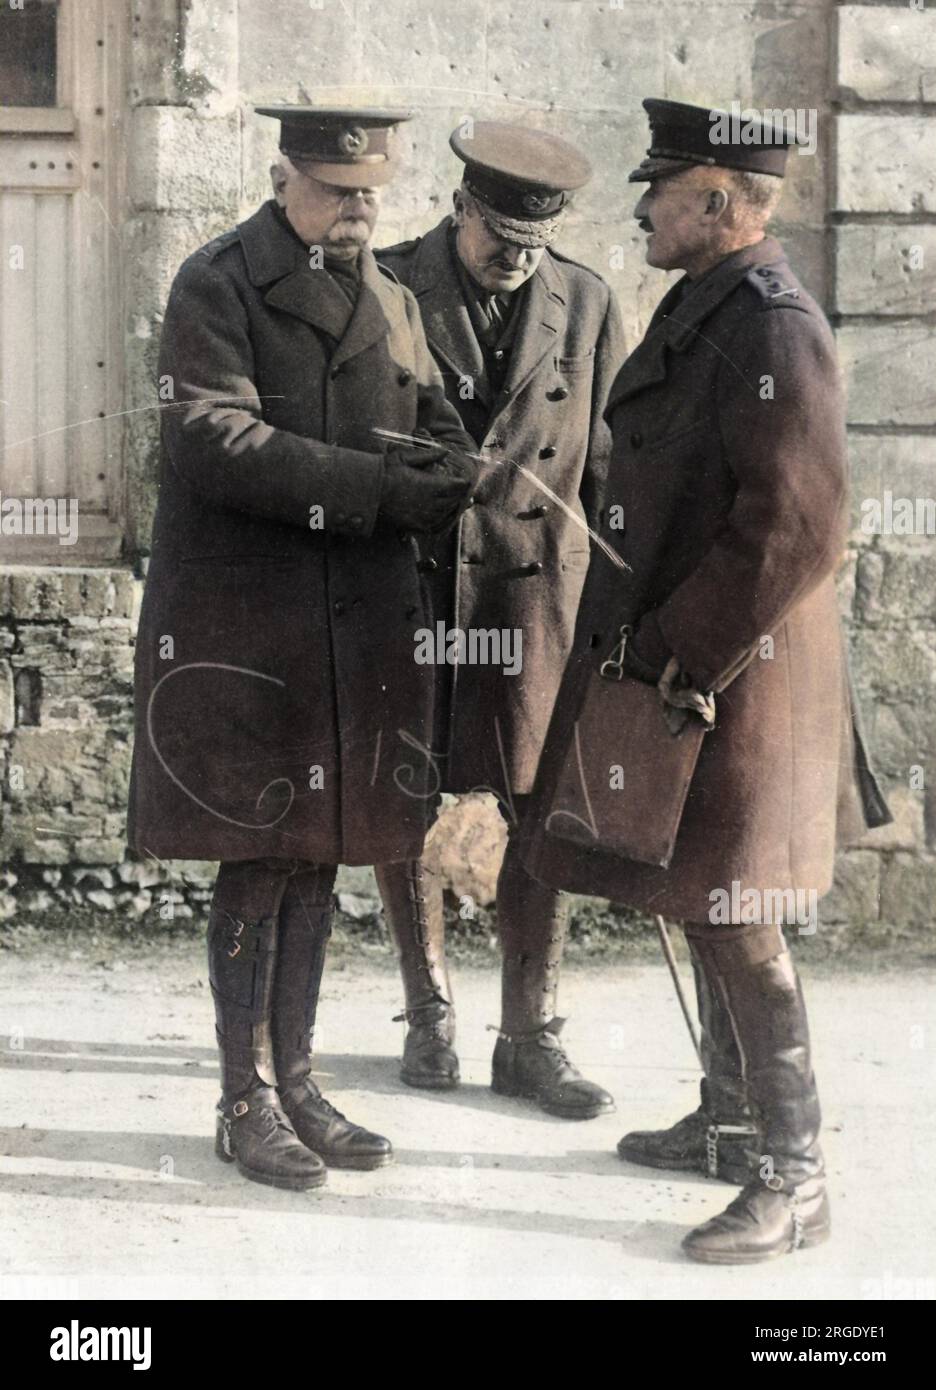 Three British Army commanders on the Western Front in France during World War One.  They are: General Sir Herbert Plumer (nicknamed Old Plum), General Sir Edmund Allenby, and General Sir Henry Horne. Stock Photo